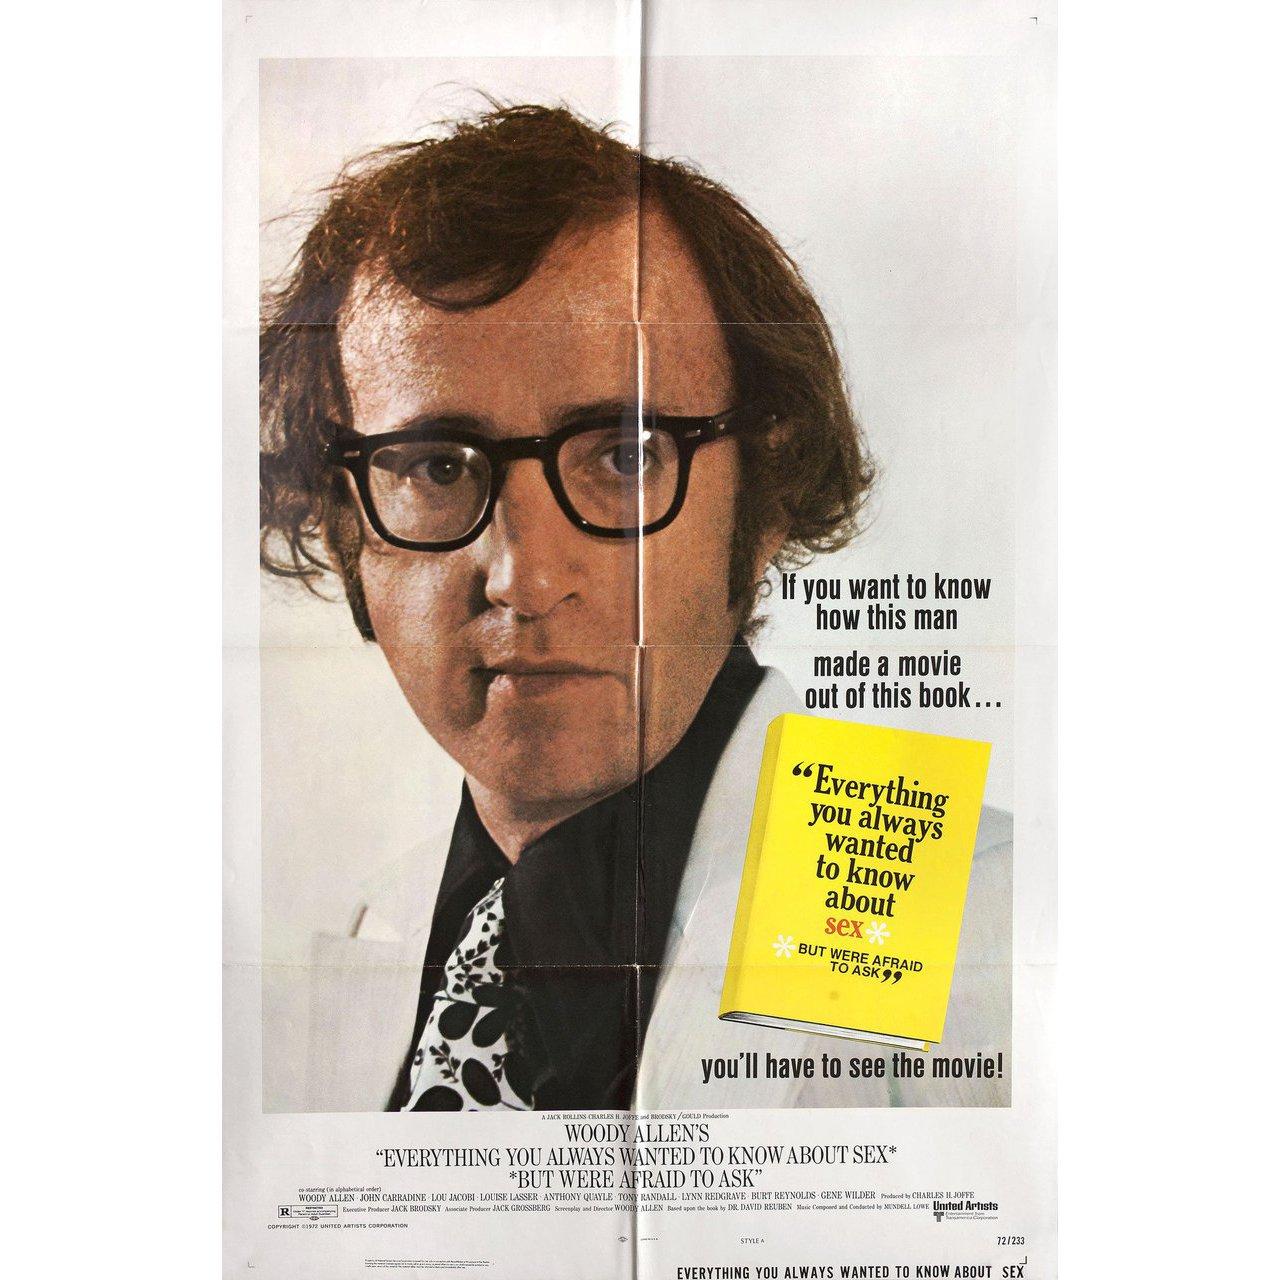 Original 1972 U.S. one sheet poster for the film Everything You Always Wanted to Know About Sex (Everything You Always Wanted to Know About Sex But Were Afraid to Ask) directed by Woody Allen with Woody Allen / John Carradine / Lou Jacobi / Louise